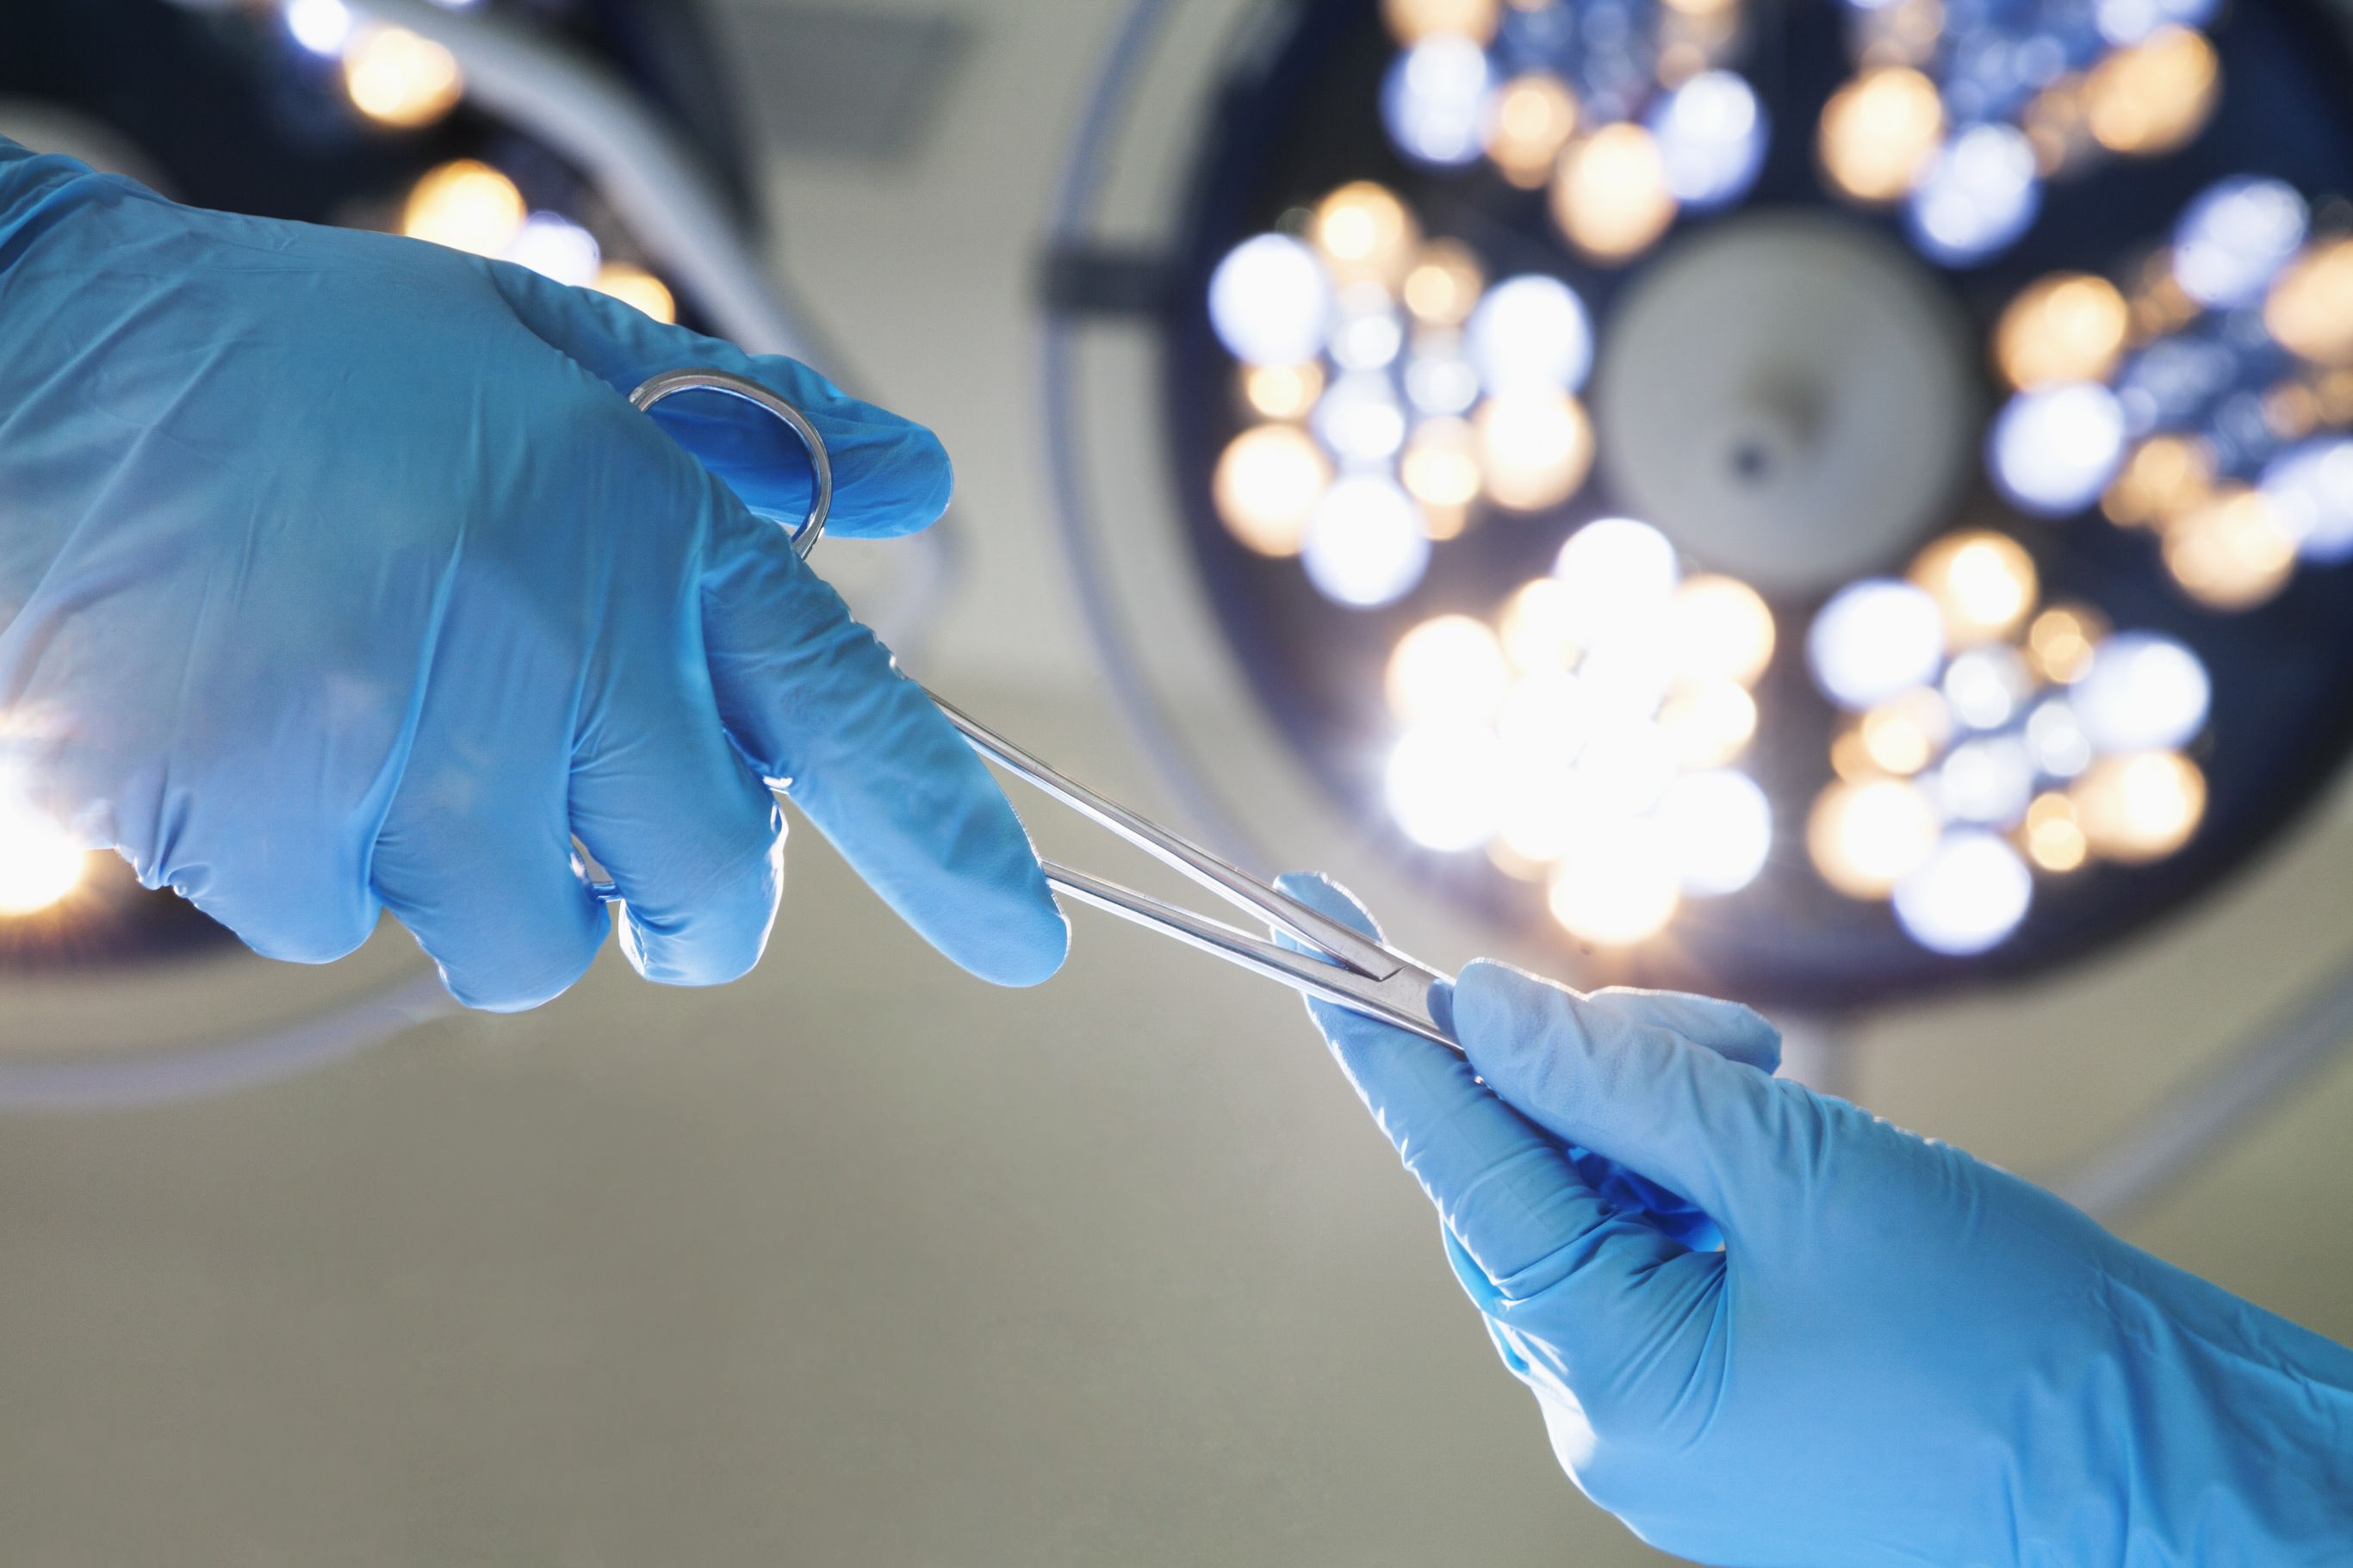 Surgeon passes forceps to assistant in an operating room, Cooley Dickinson Medical Group Plastic Surgery, Florence, MA 01062.